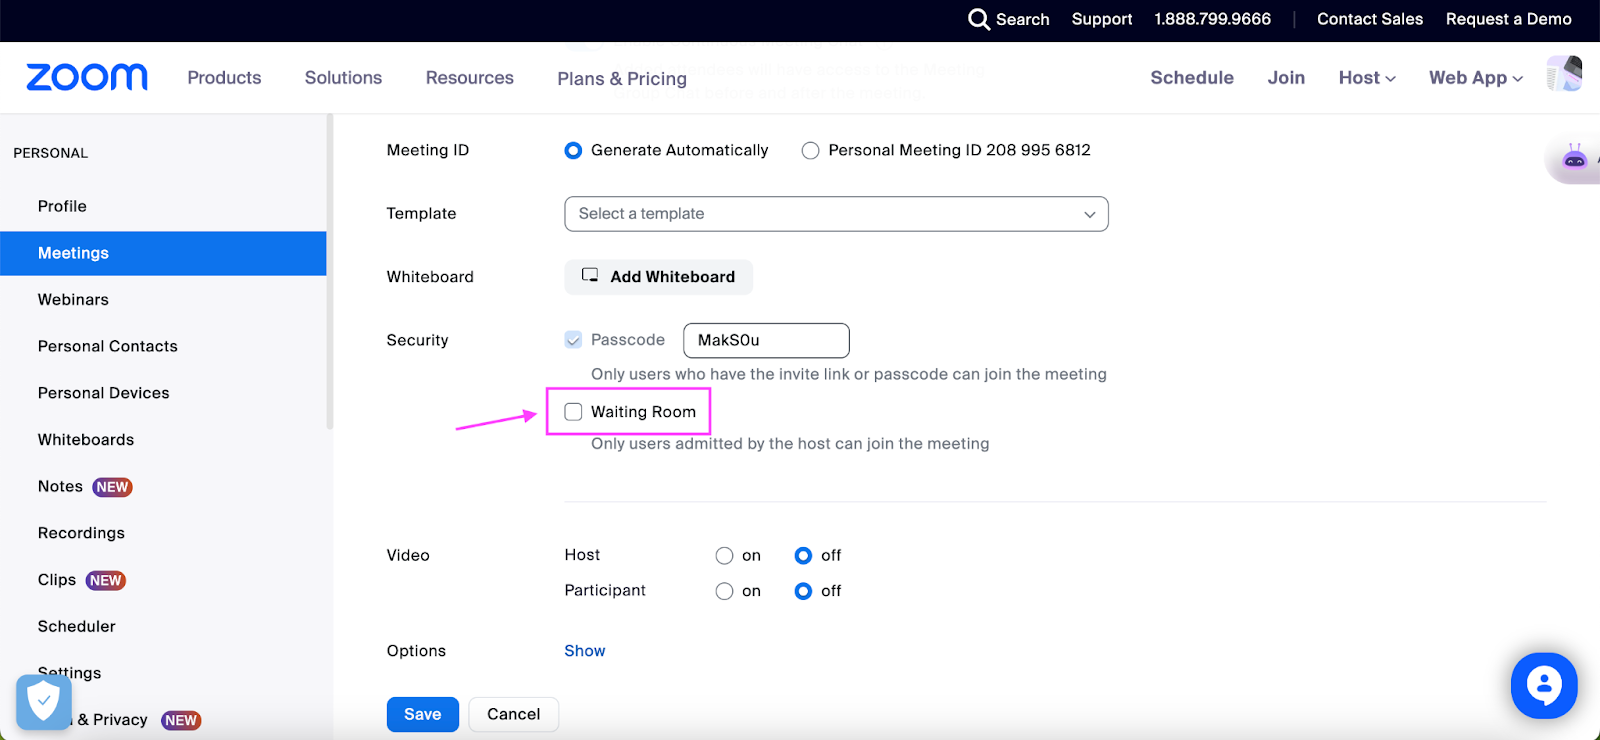 Zoom waiting room - How to enable Zoom Waiting Room for a single meeting